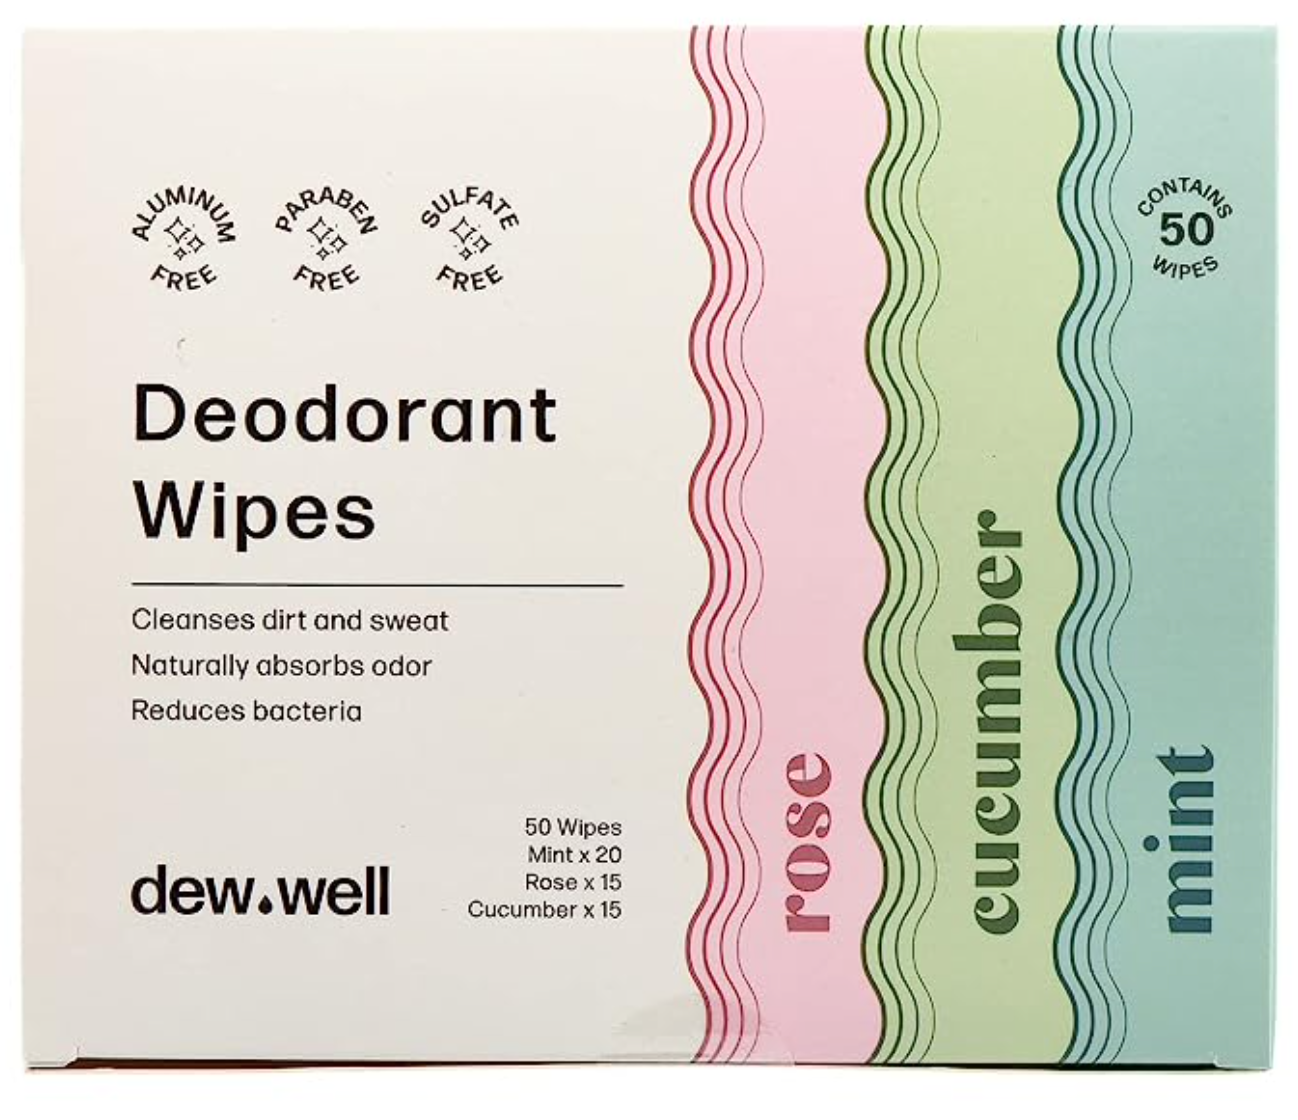 Dew Well - Refresh Deodorant Wipes - A Fresh Start When You’re On the Go - Aluminum, Paraben, and Sulfate Free - Cucumber Scent - 50 Individually Wrapped Wipes